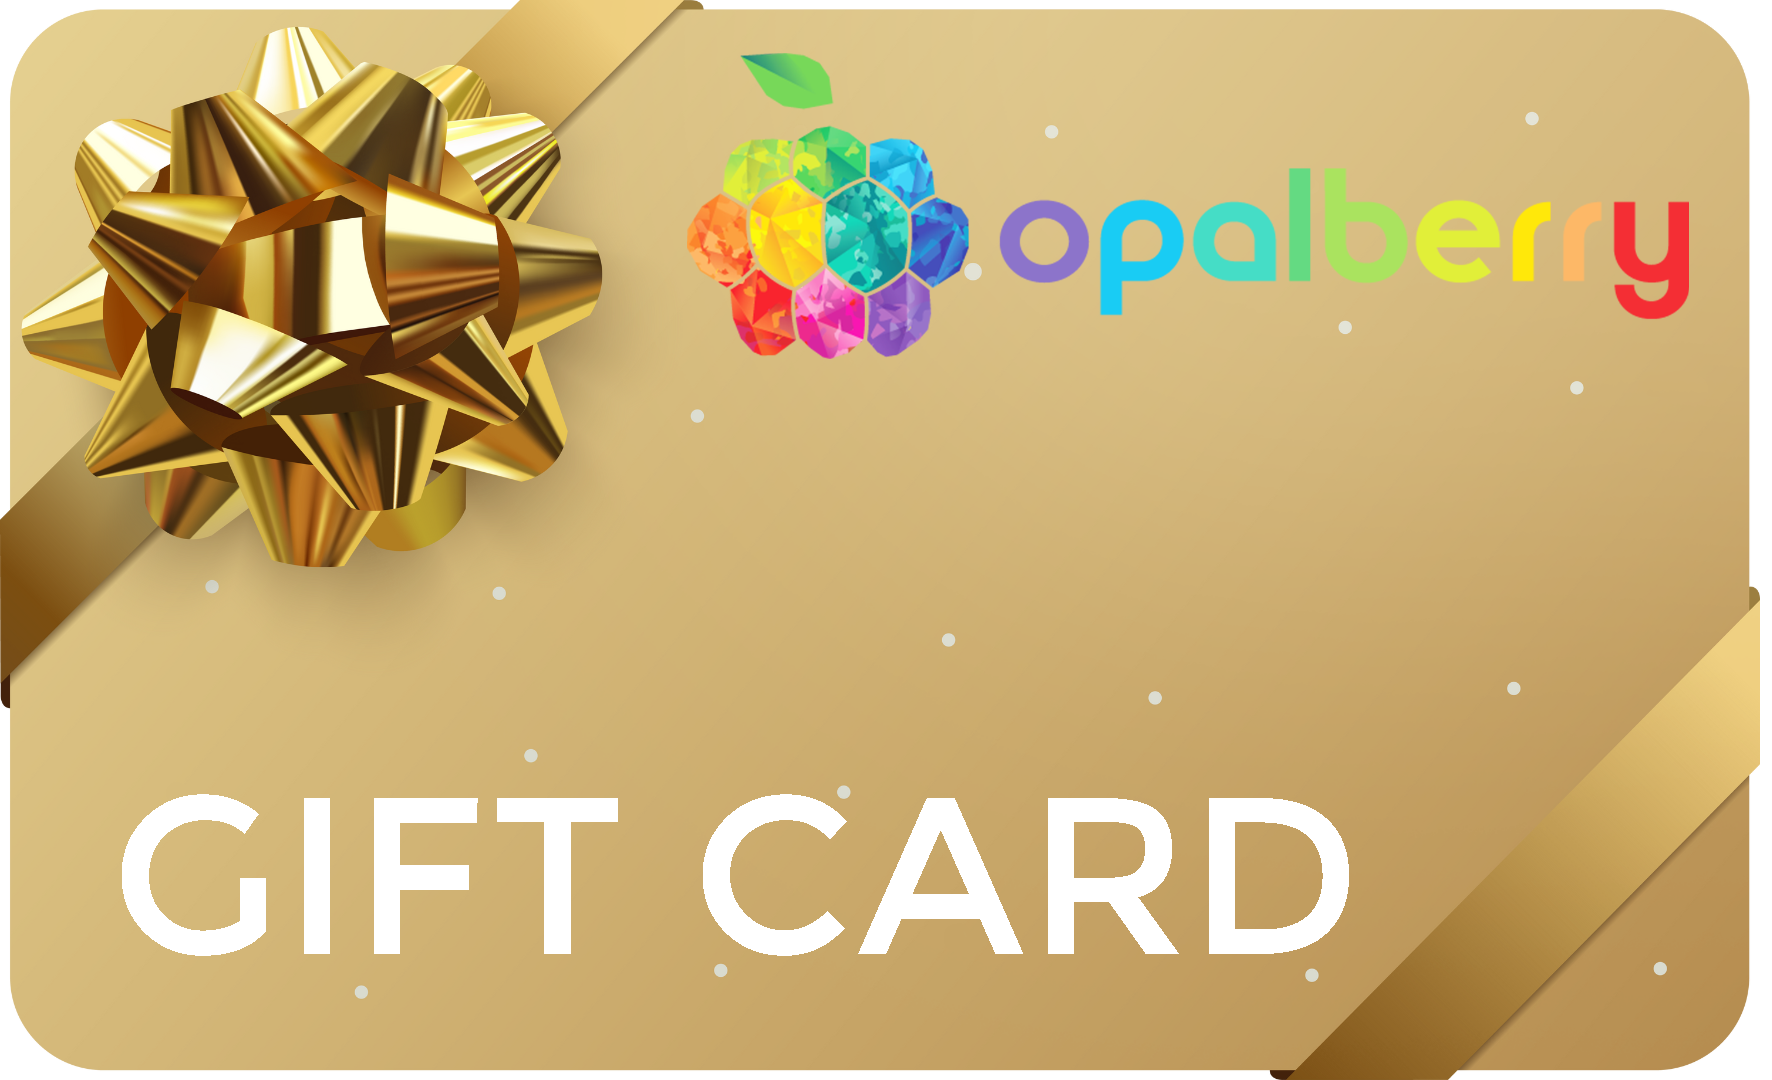 Opalberry Gift Card